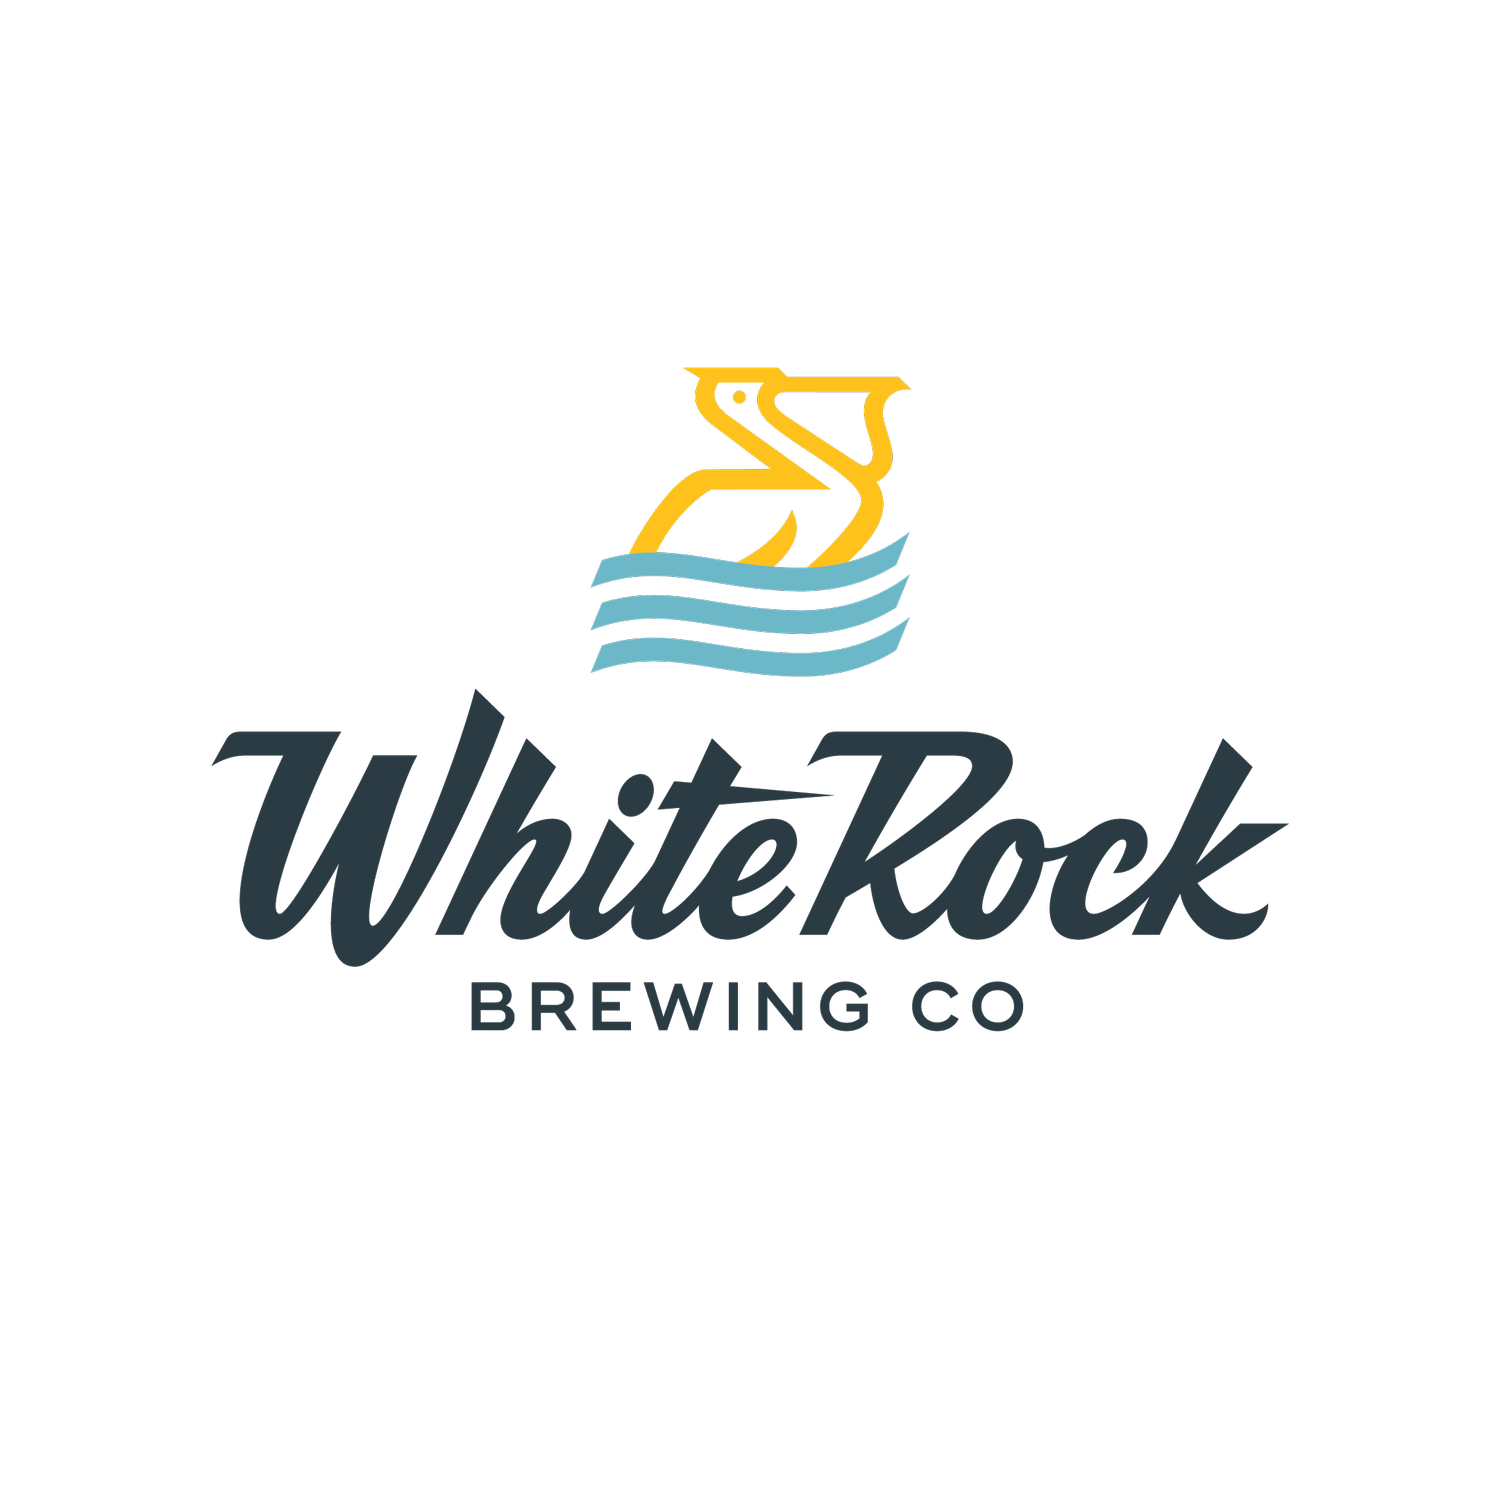 White Rock Brewing Co